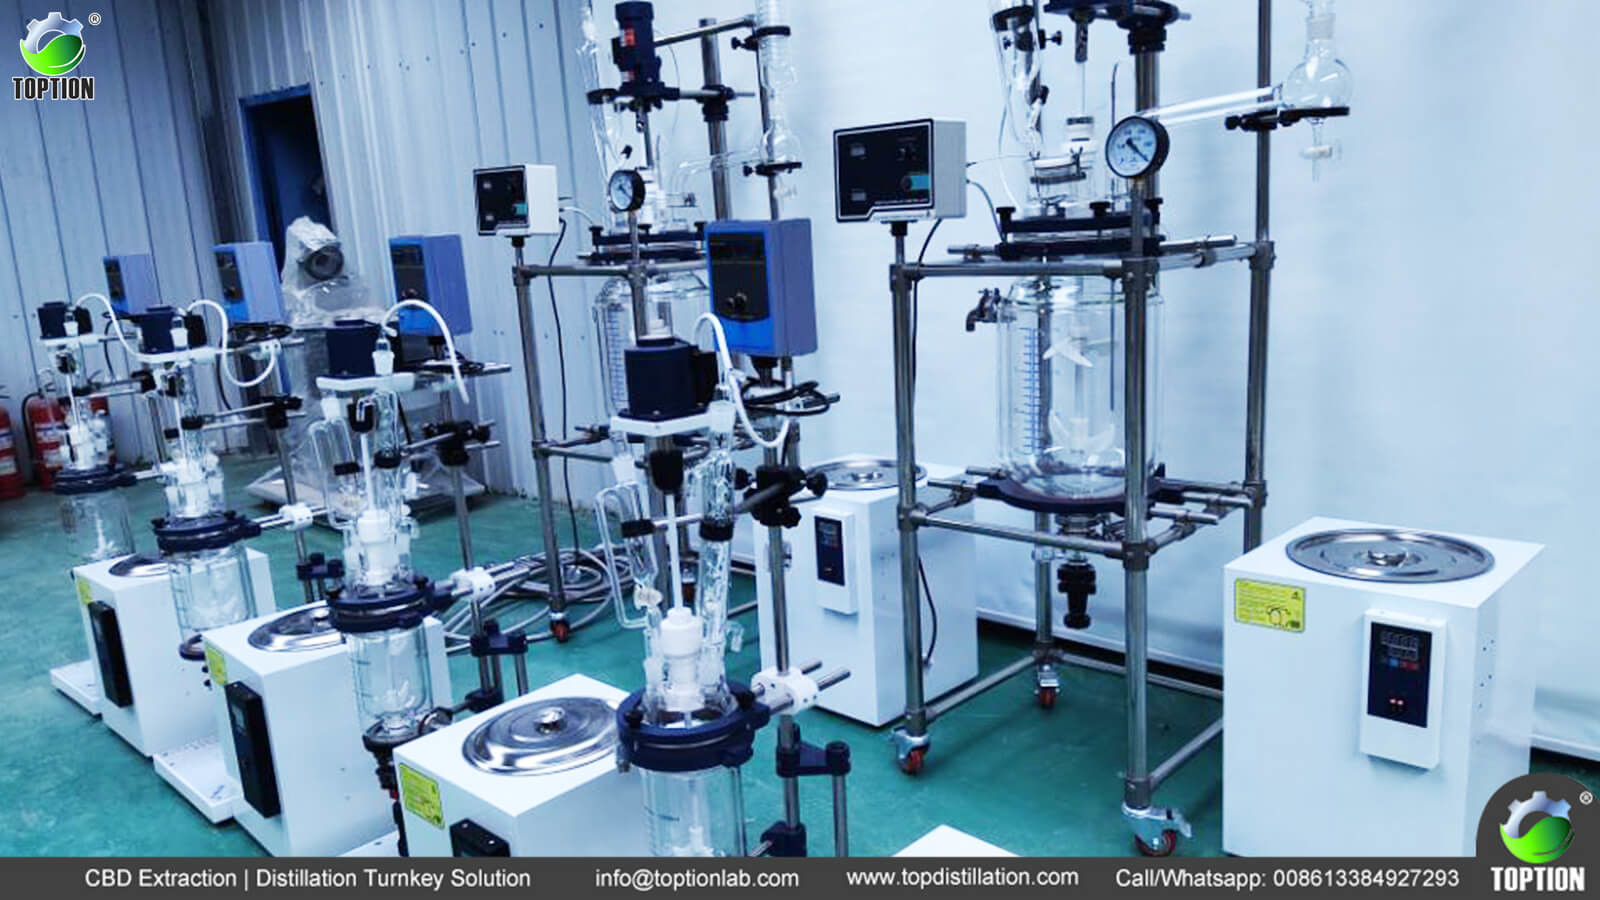 latest company news about Why choose TOPTION jacketed glass reactor?  0